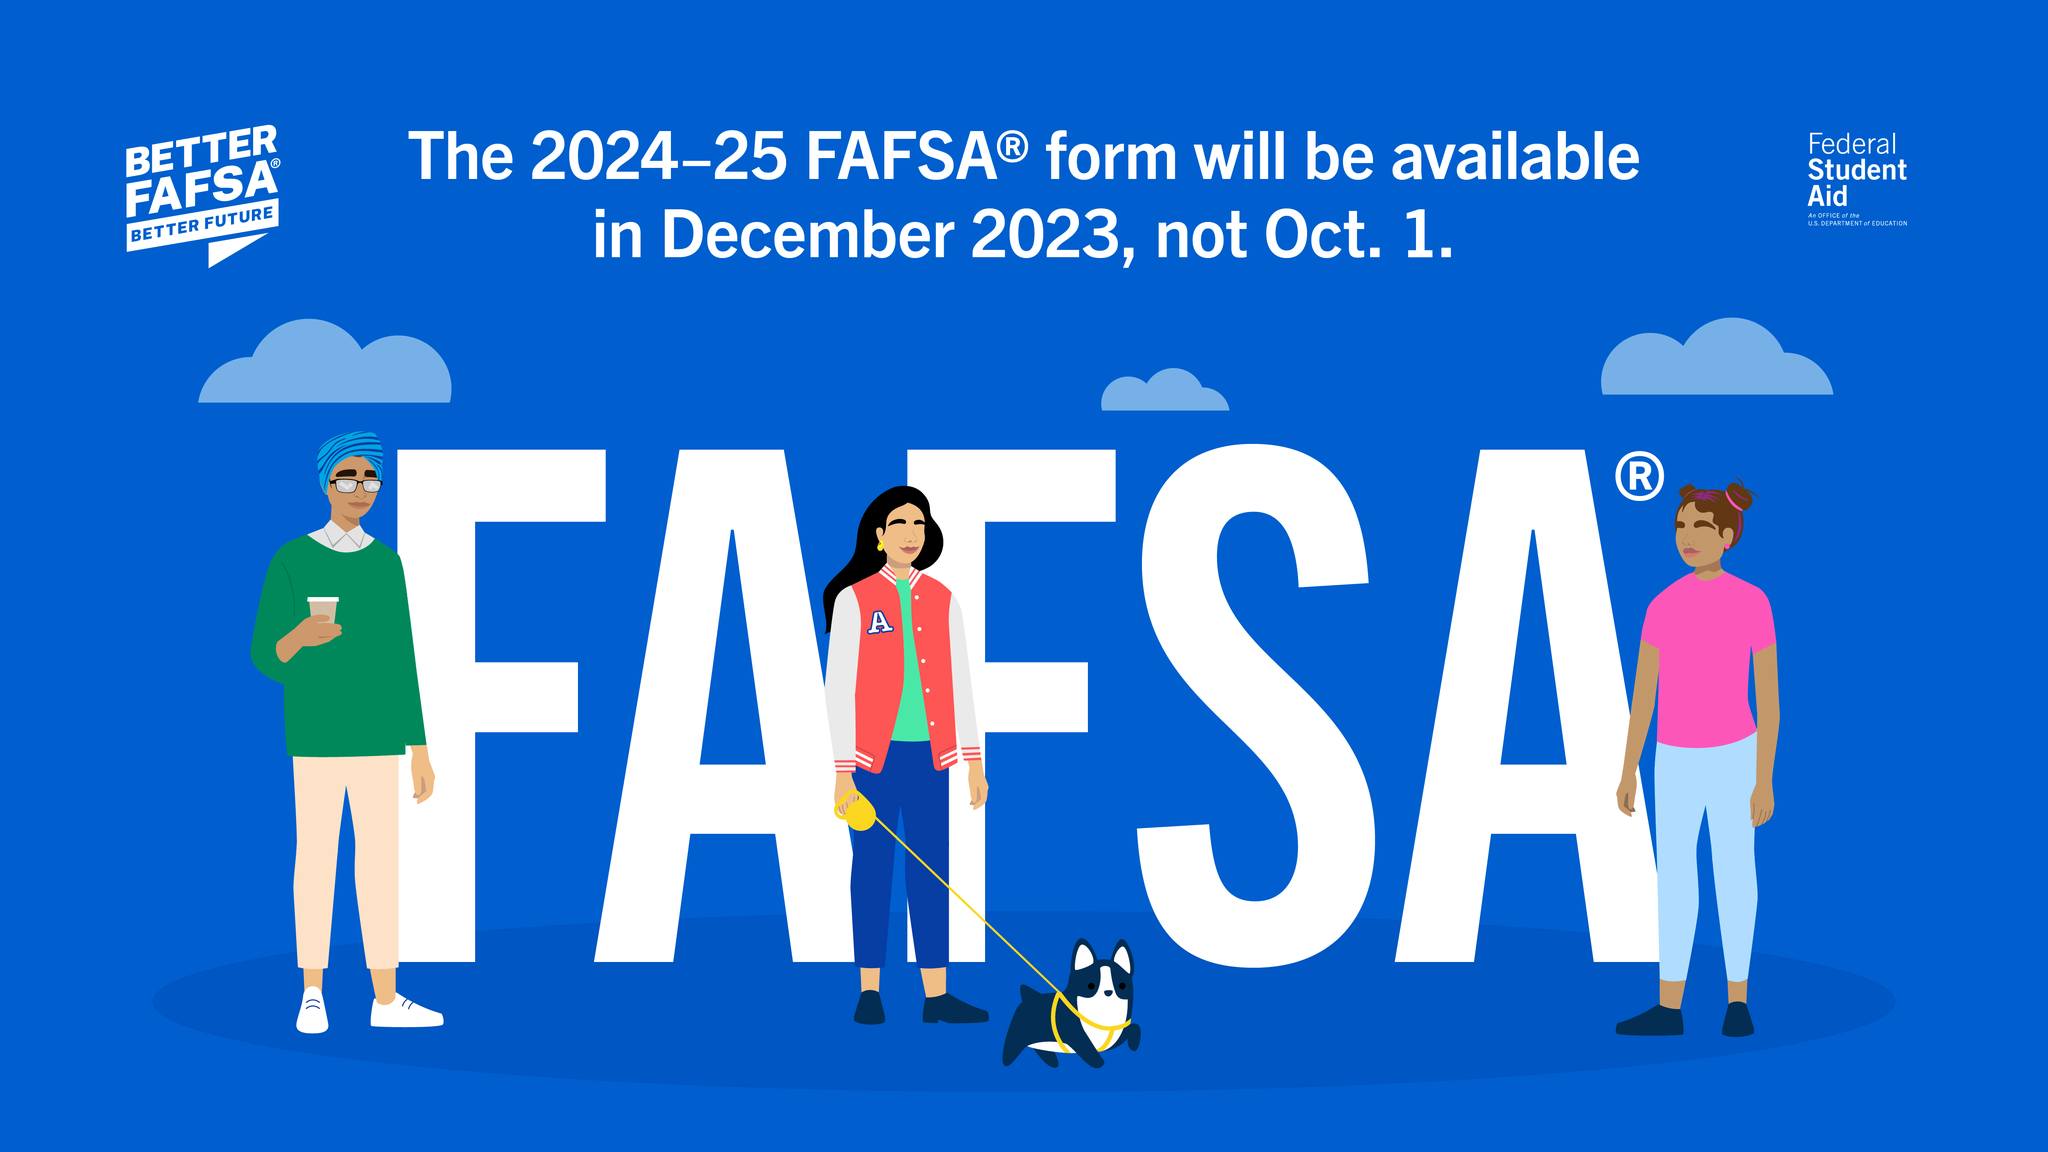 2024-2025 FAFSA Form will be available Dec 2023, not Oct 1.